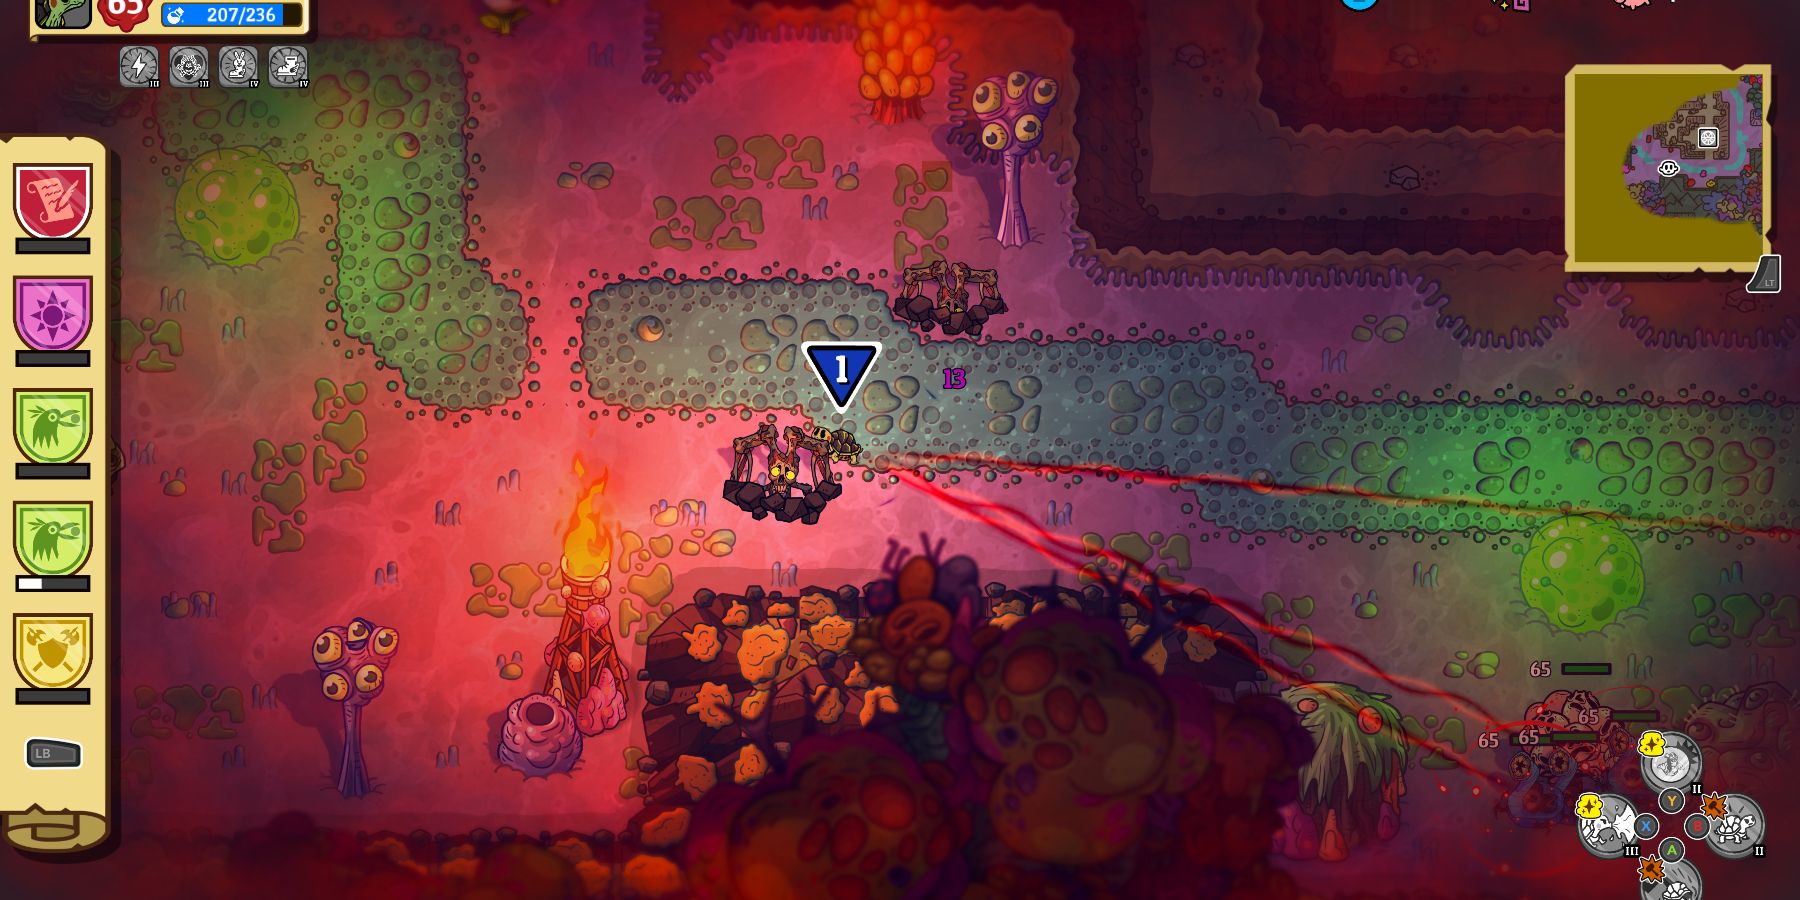 a small turtle next to a spindle-legged monster with a decomposed skull trails three beams of red light from nearby enemies. the world is dimly lit and purplish, with mutated plants and strange, grotesque structures all around